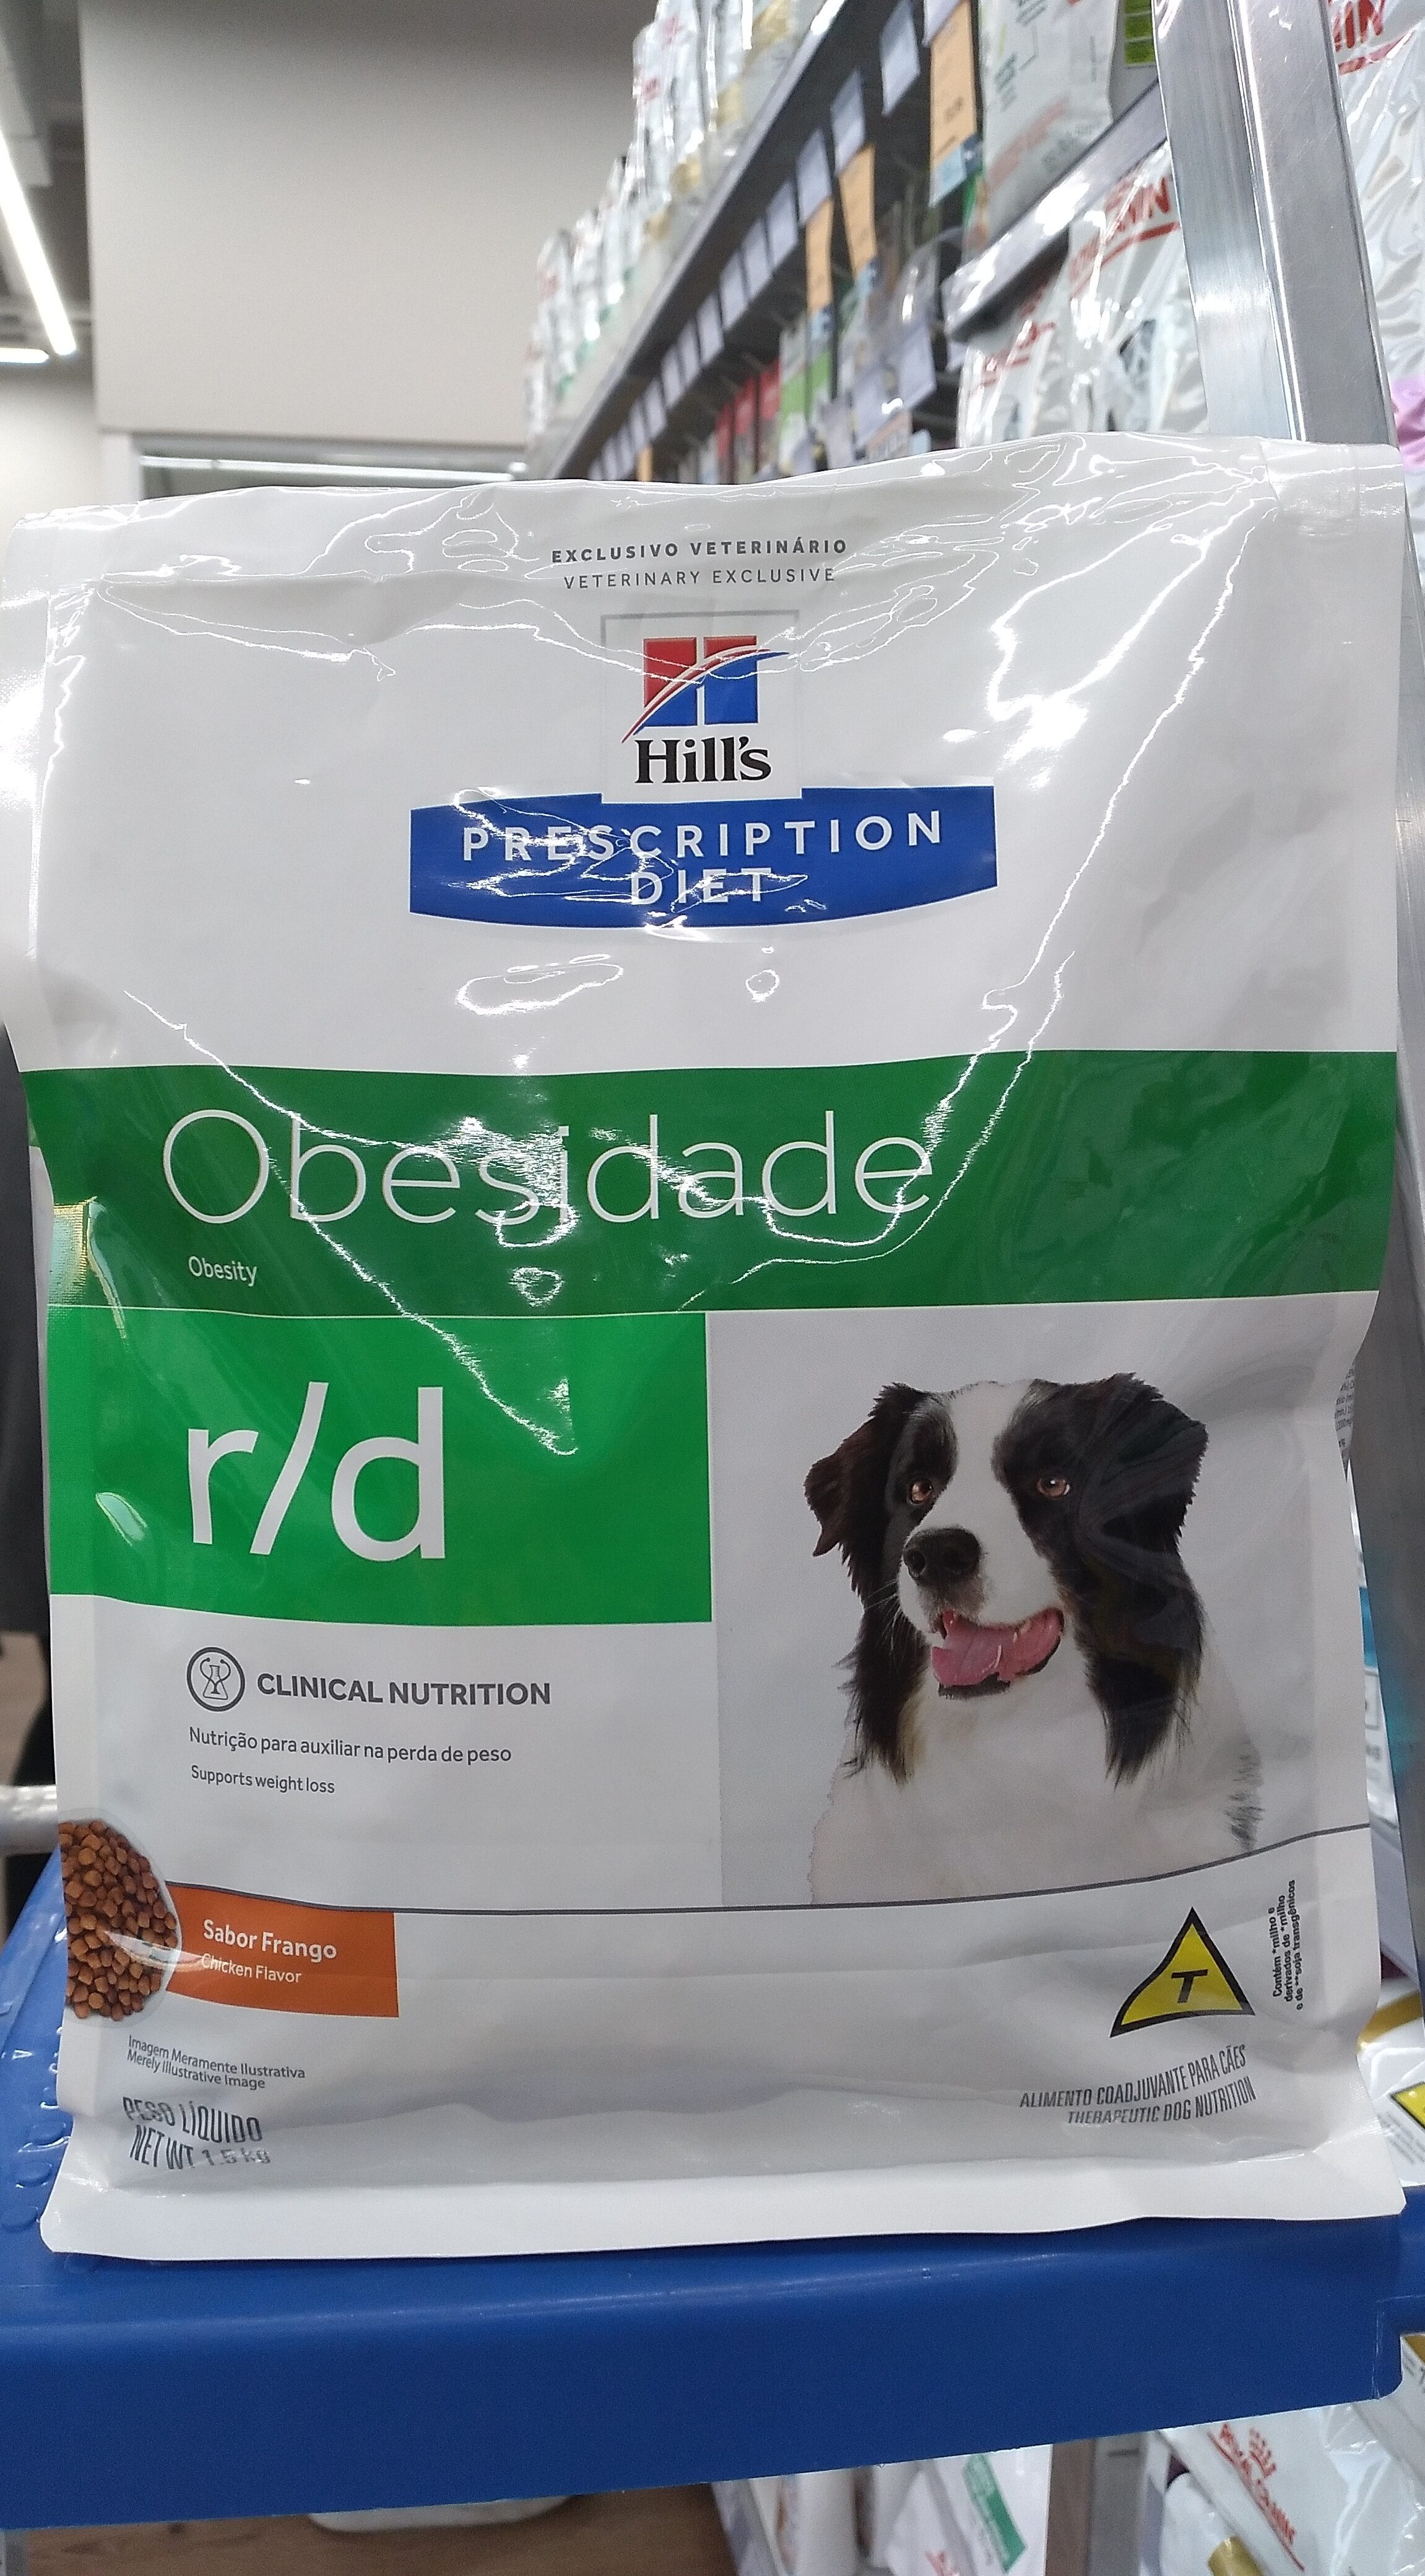 Hill's Obesidade 1.5kg - Product - pt